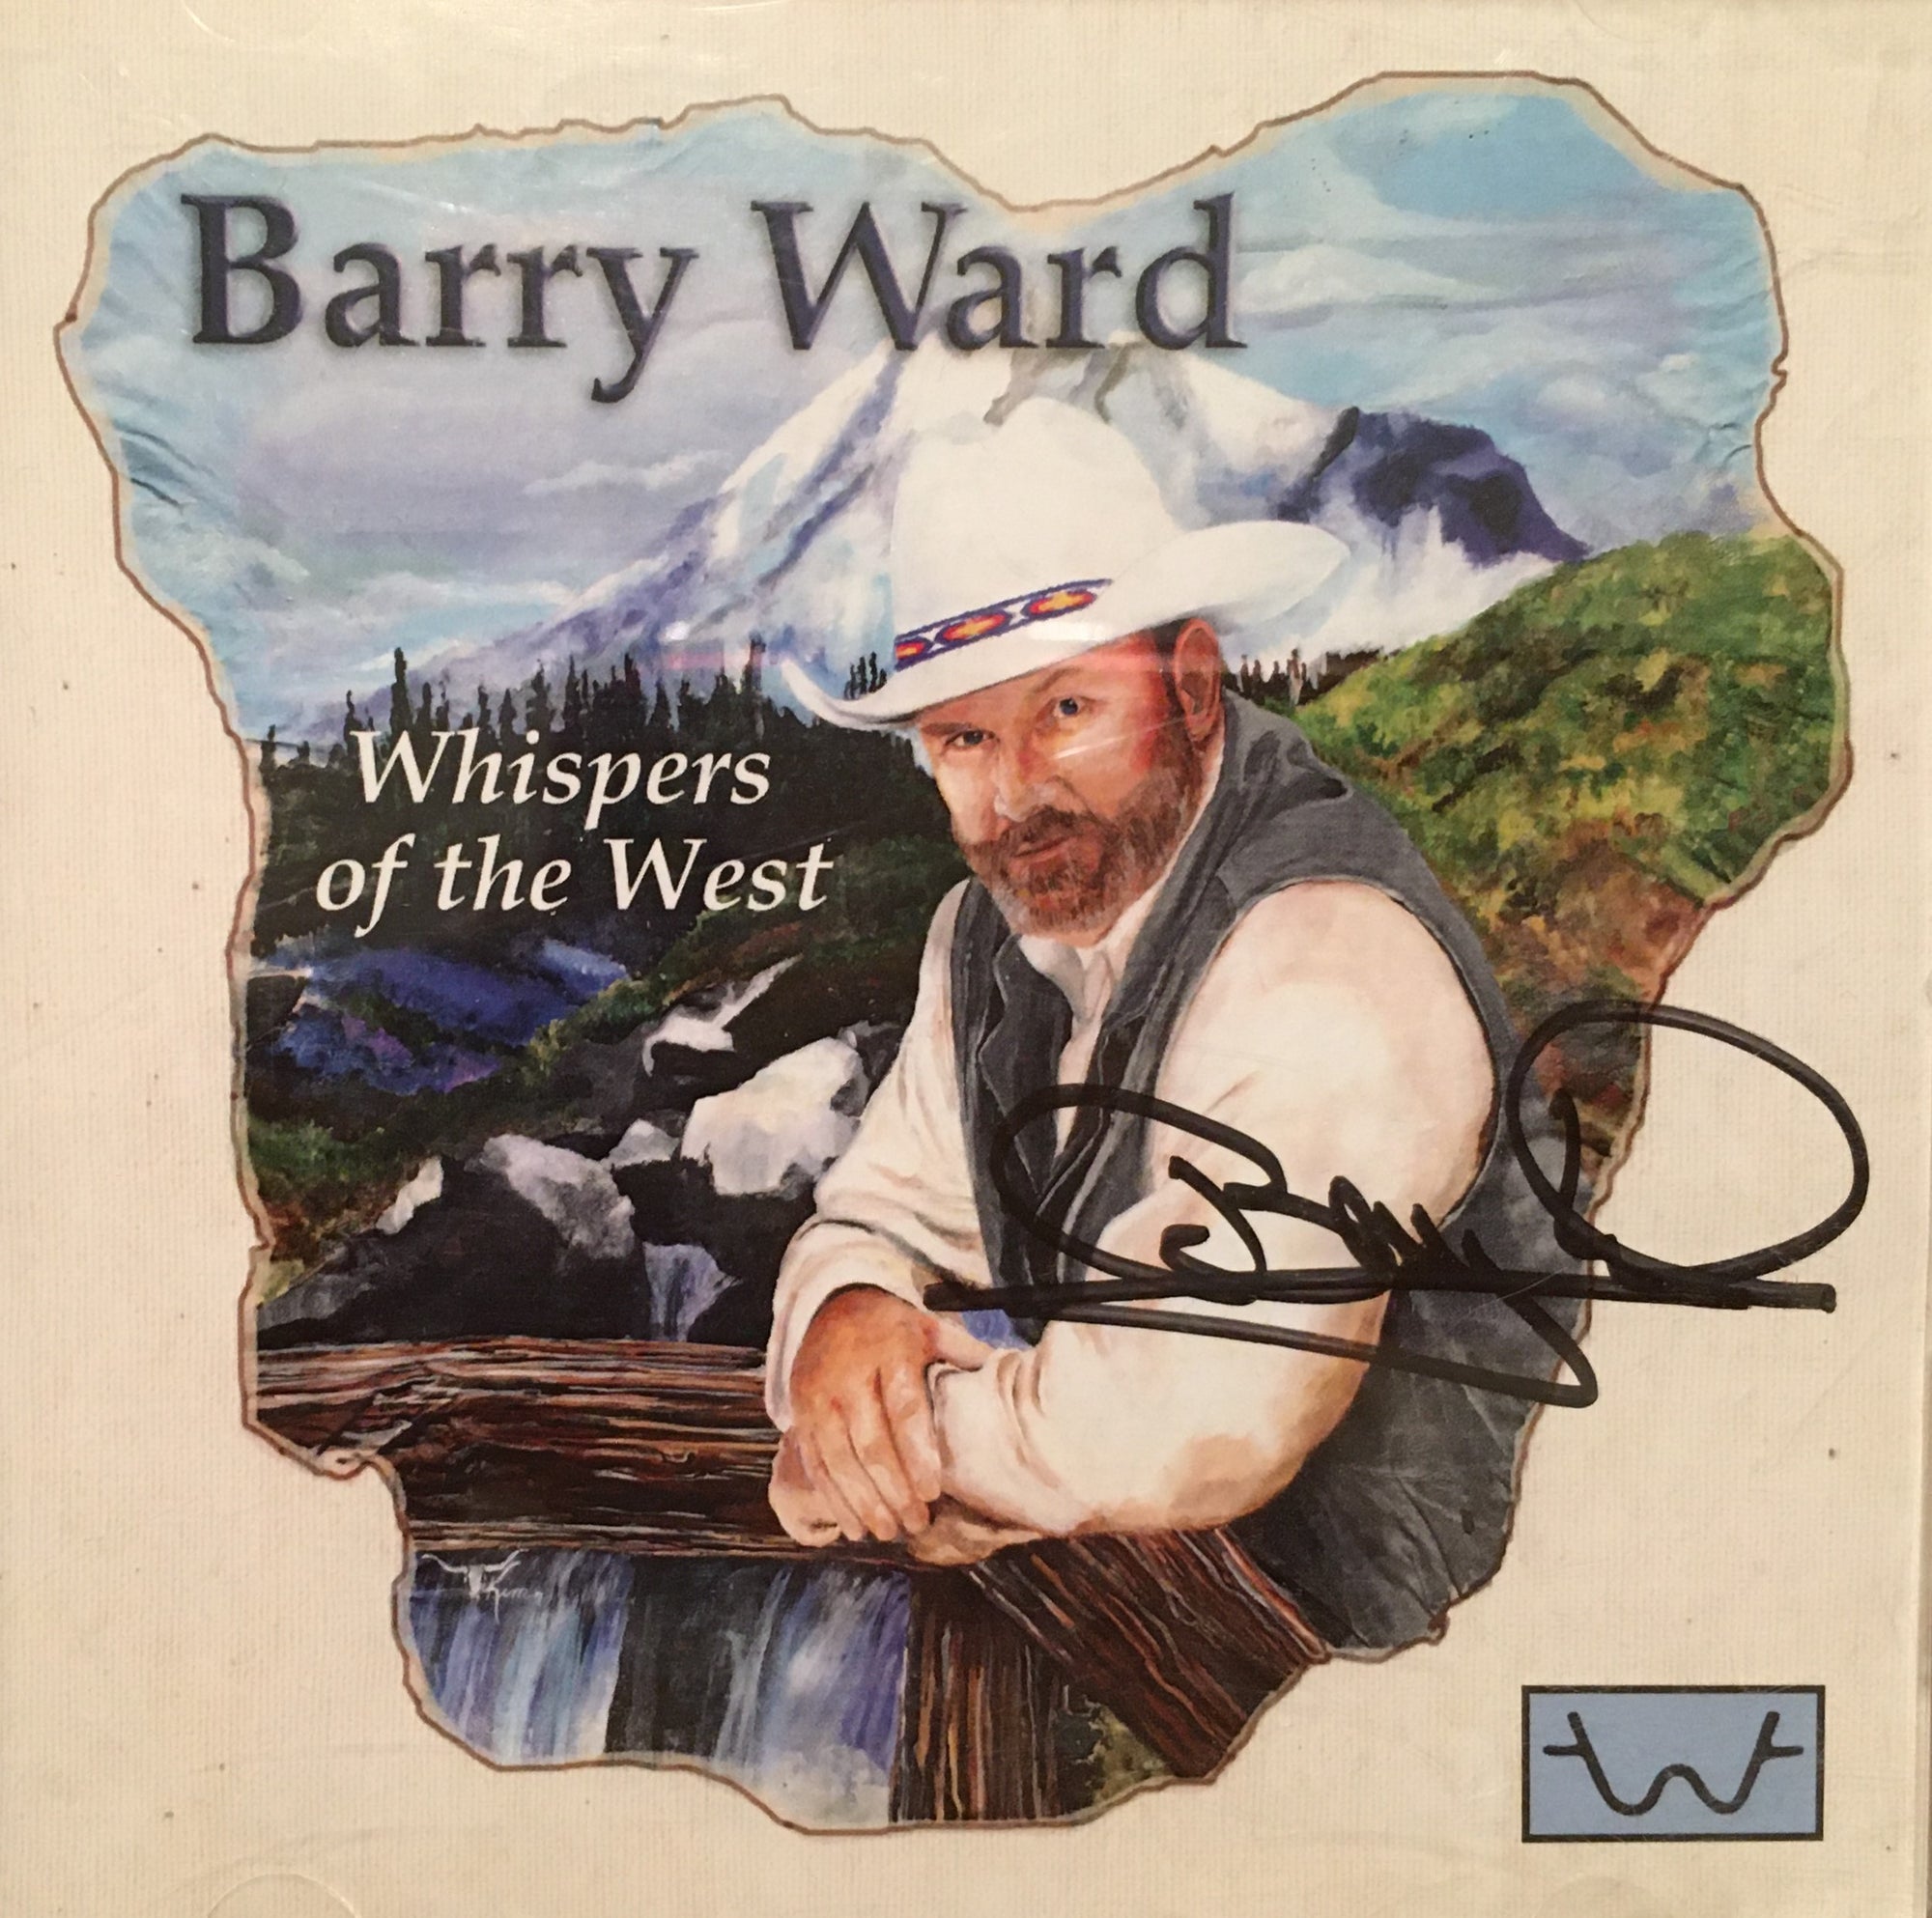 CD Whispers of the West by Barry Ward